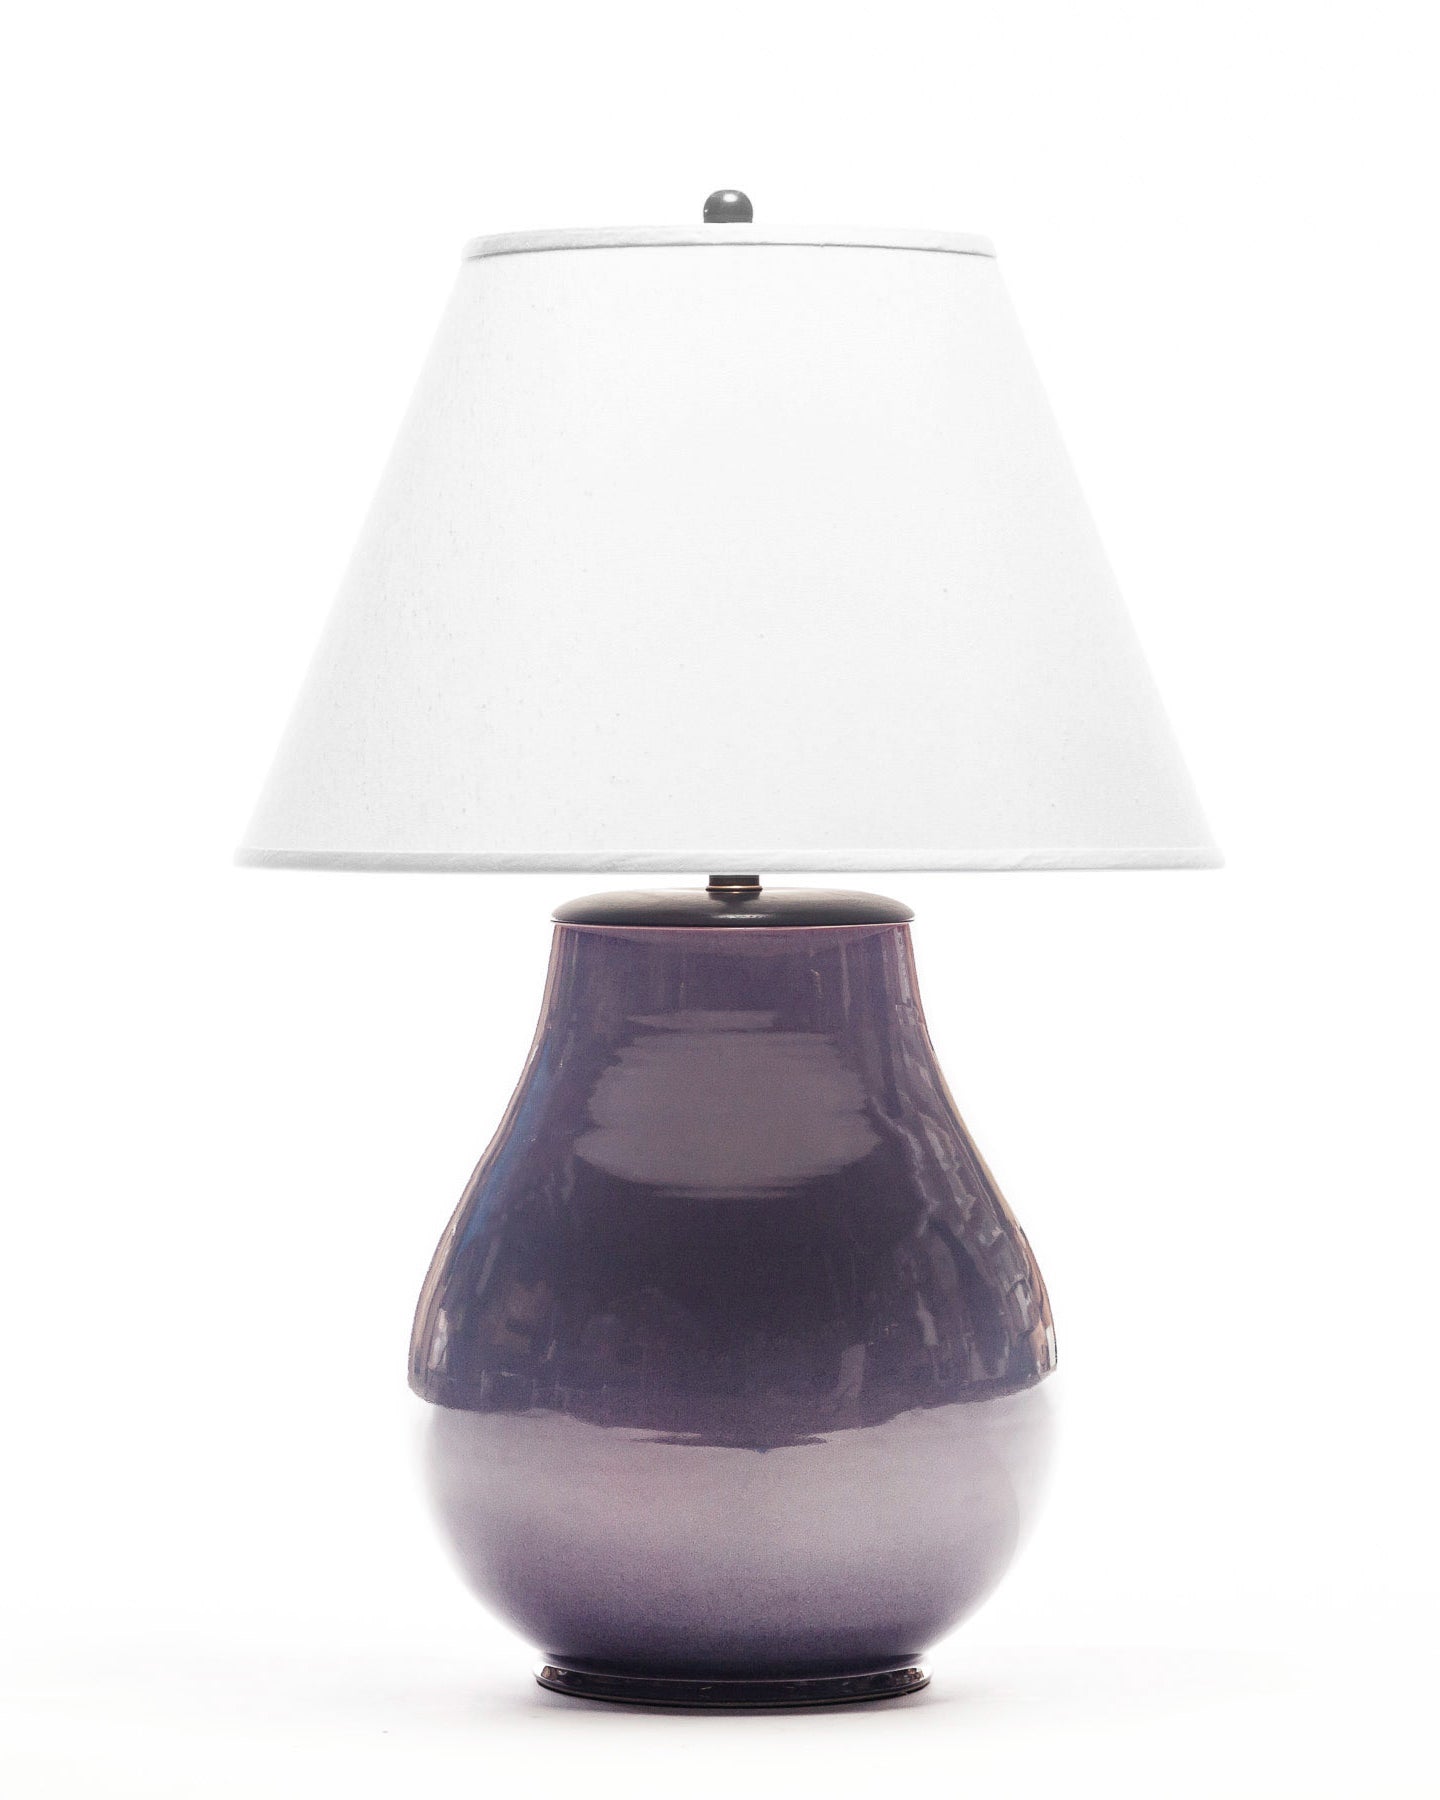 Lawrence & Scott Lillian Table Lamp in Oyster Gray with Rosewood Cap